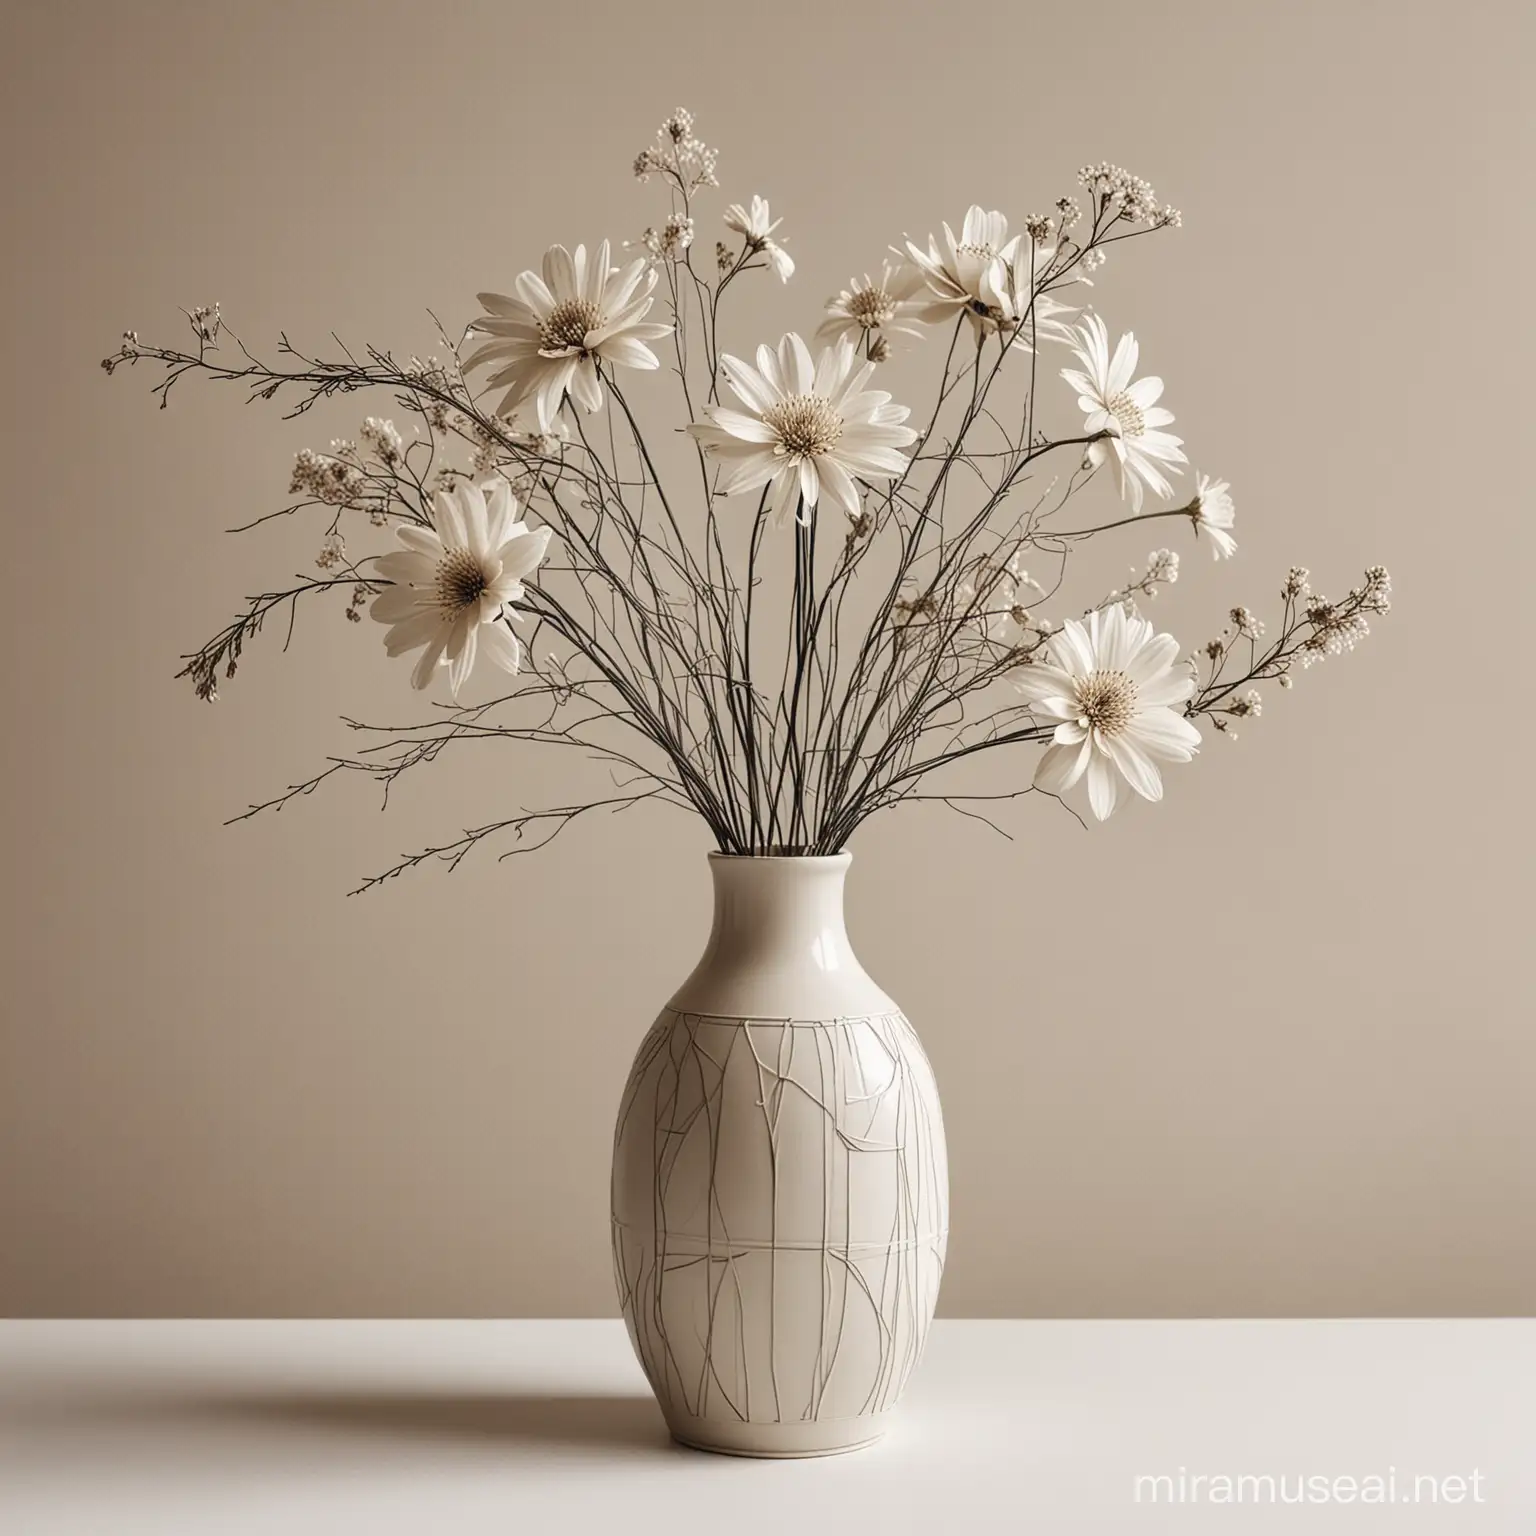 Minimalist Vase with Unfinished Floral Sketches